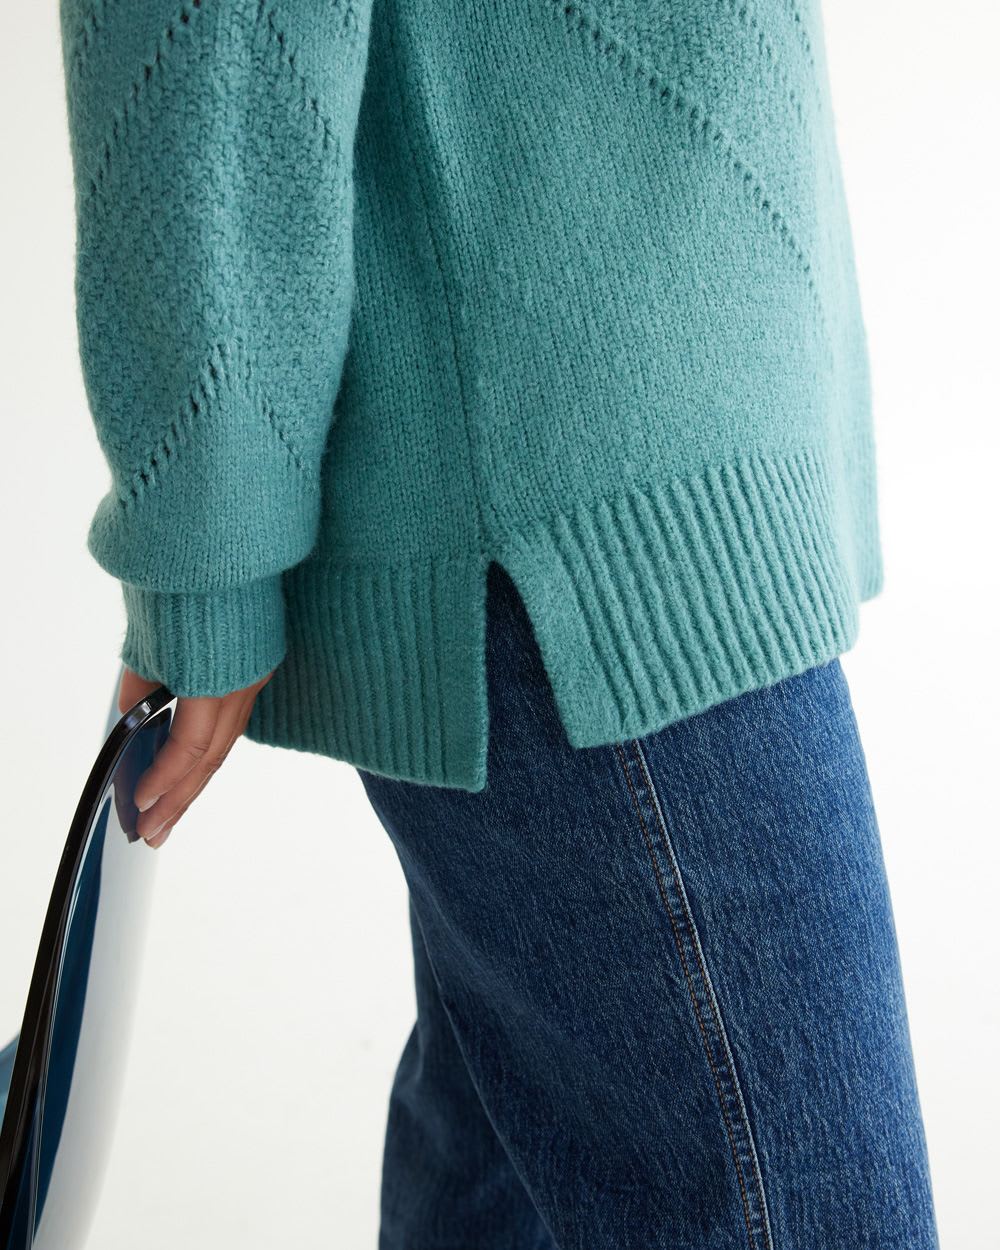 Long-Sleeve Mock-Neck Sweater with Fancy Stitches